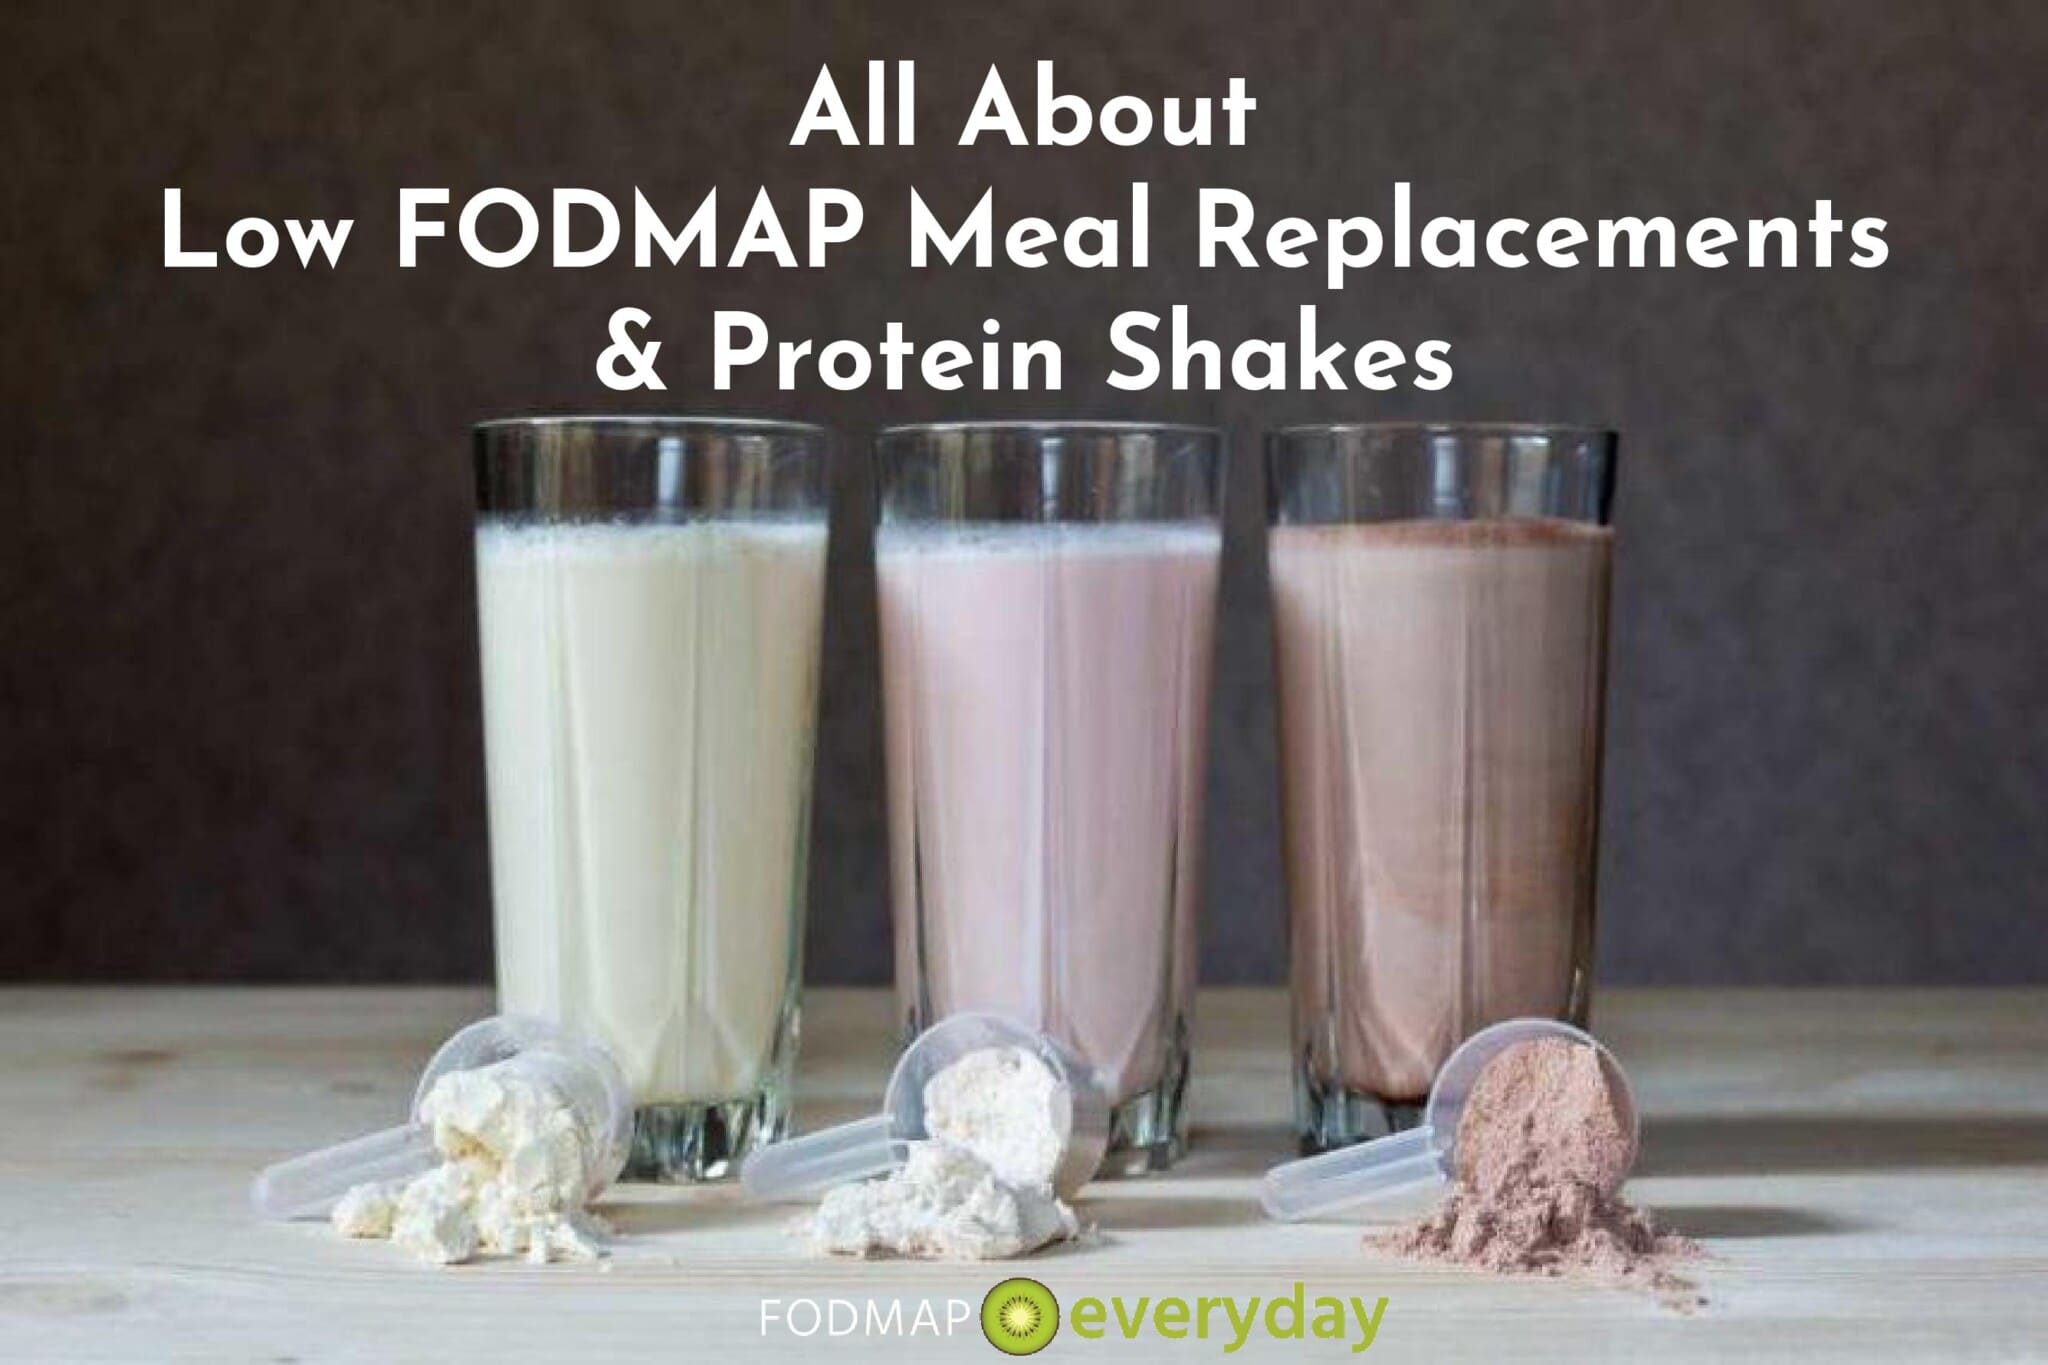 All About Low FODMAP Meal Replacements, Protein Powders & Protein